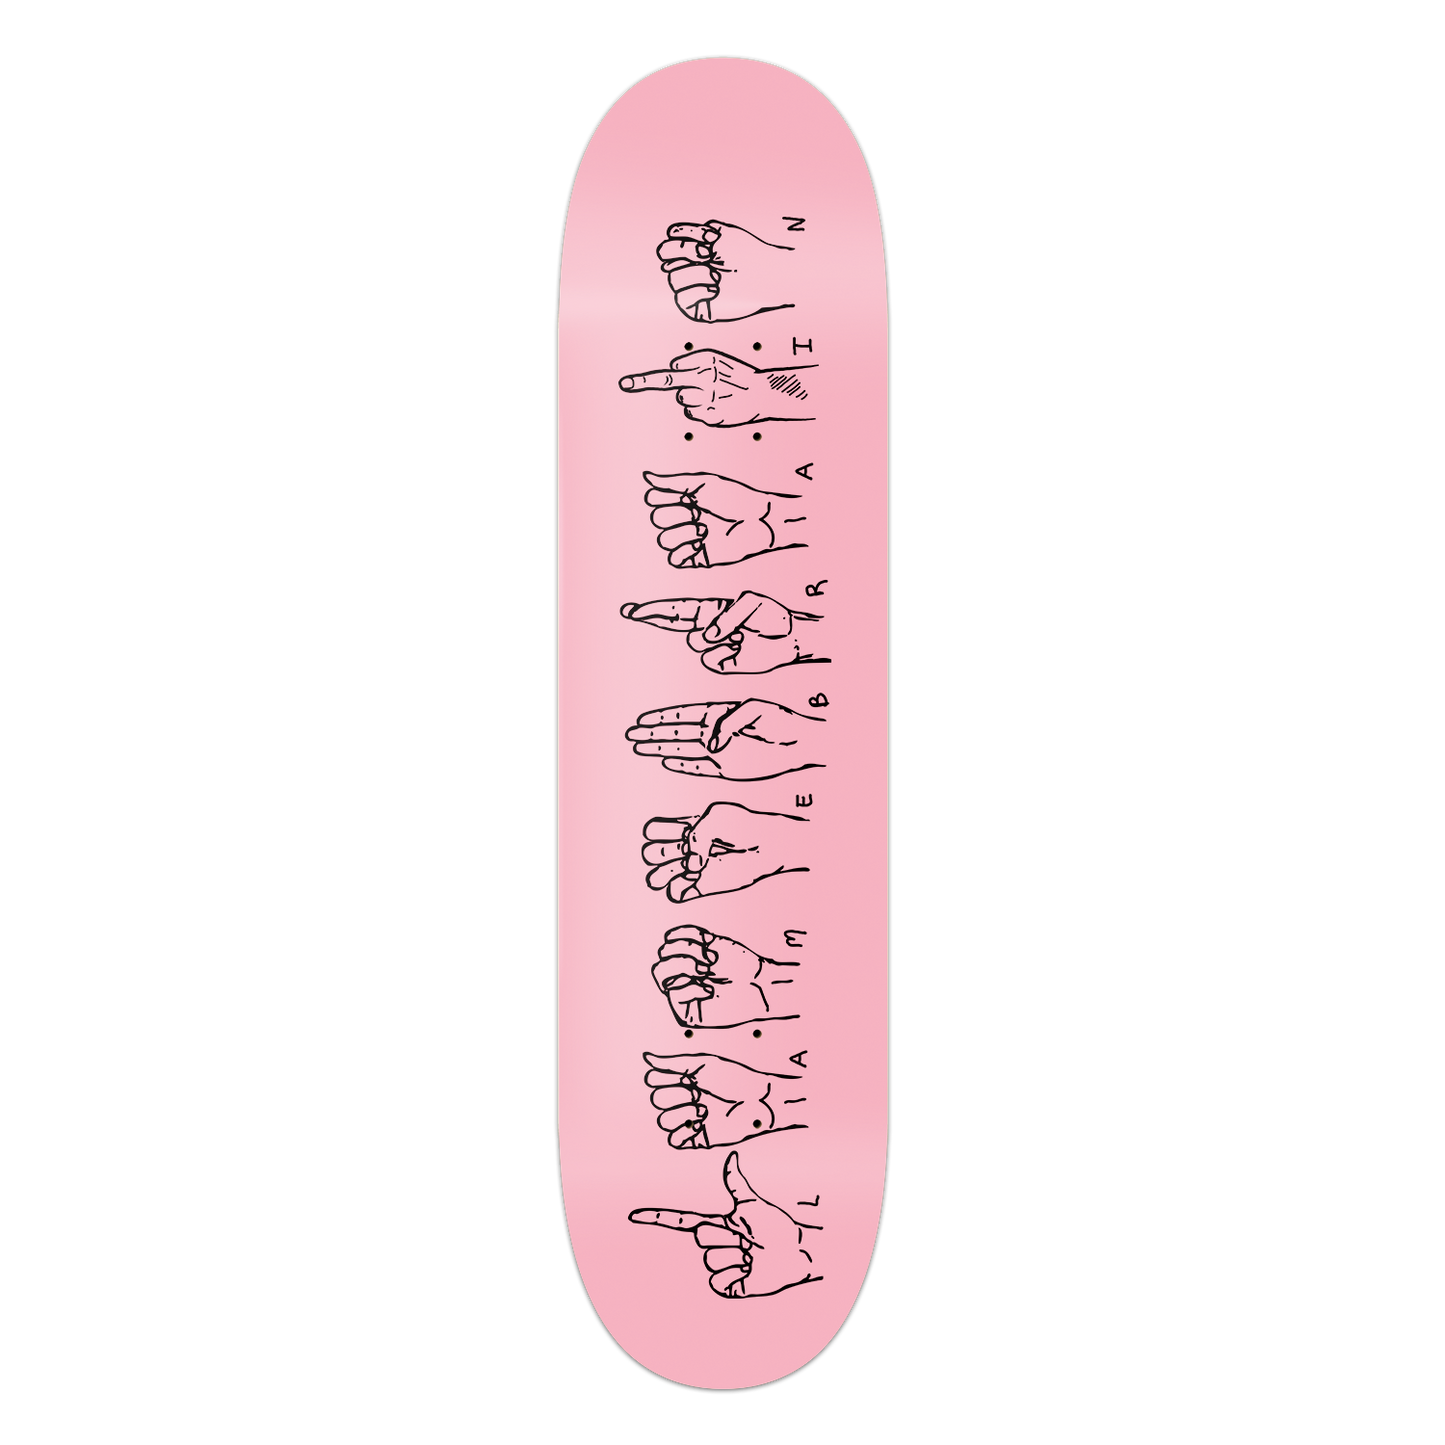 pink skateboard with sign language spelling out lamebrain. I is replaced with a middle finger